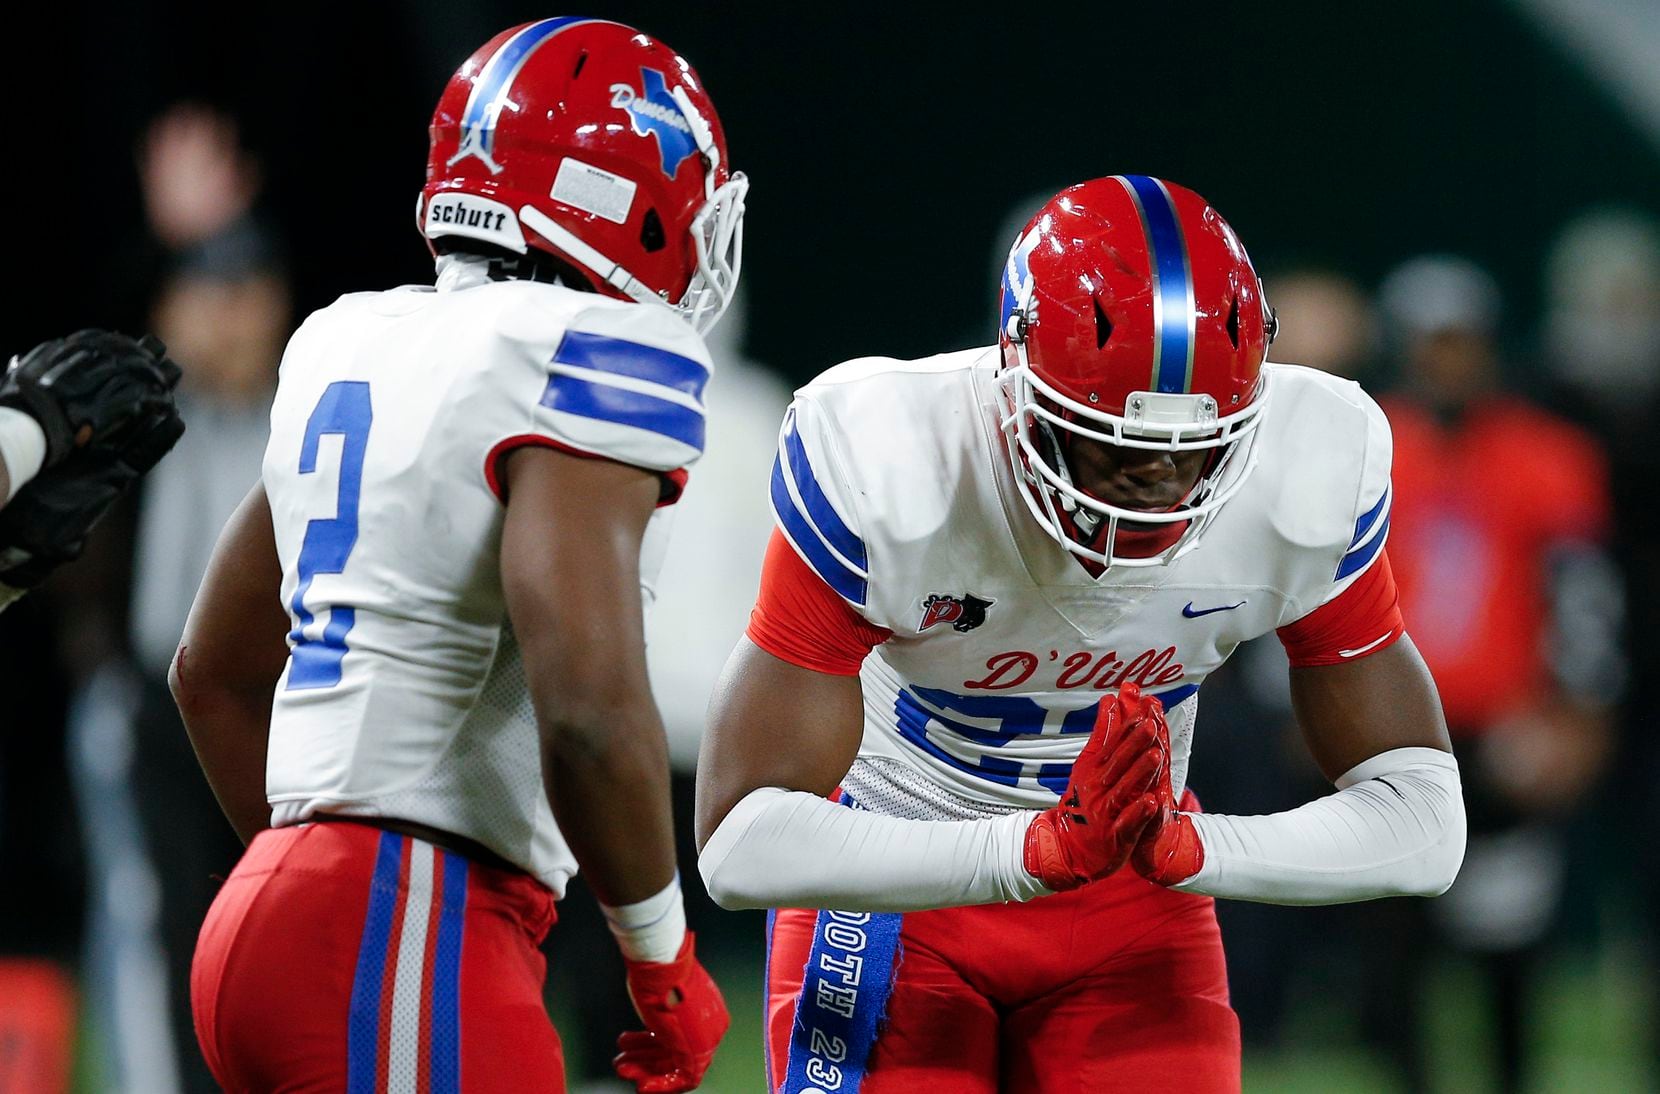 Duncanville junior linebacker Jordan Crook (2) looks on as junior defensive end Omari Abor (23) celebrates a sack during the first half of a Class 6A Division I Region II final high school football game against DeSoto, Saturday, January 2, 2021.